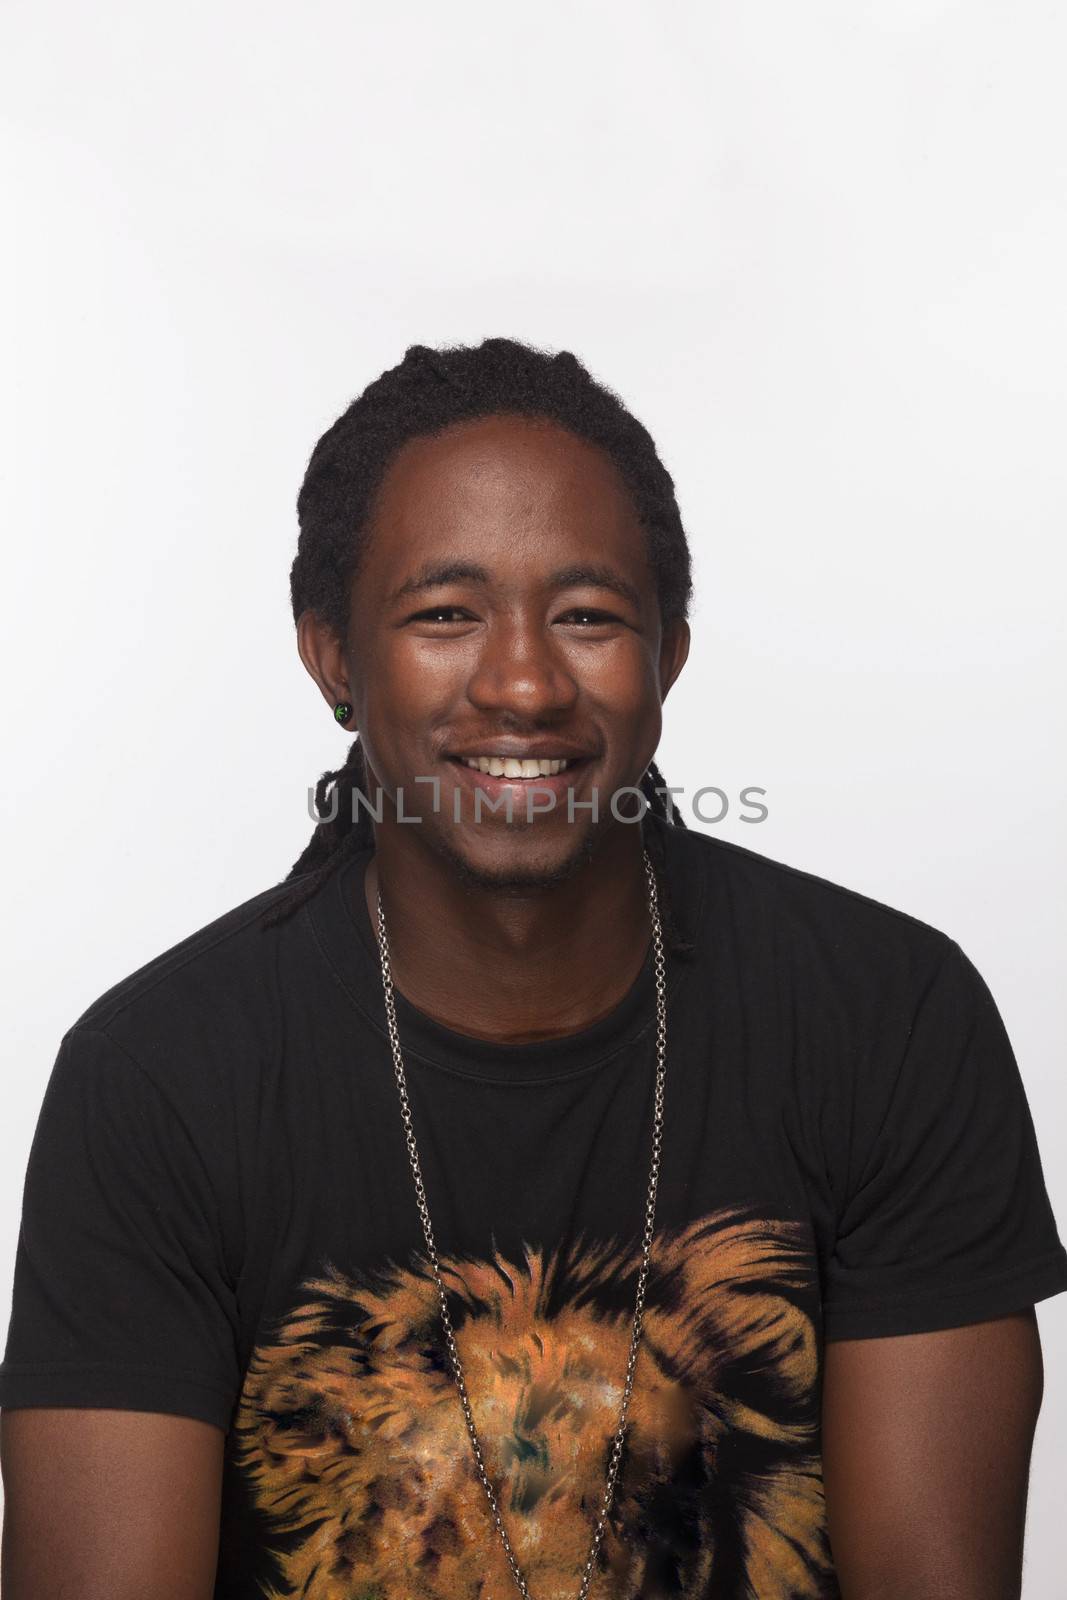 Portrait of young man with dreads smiling, studio shot